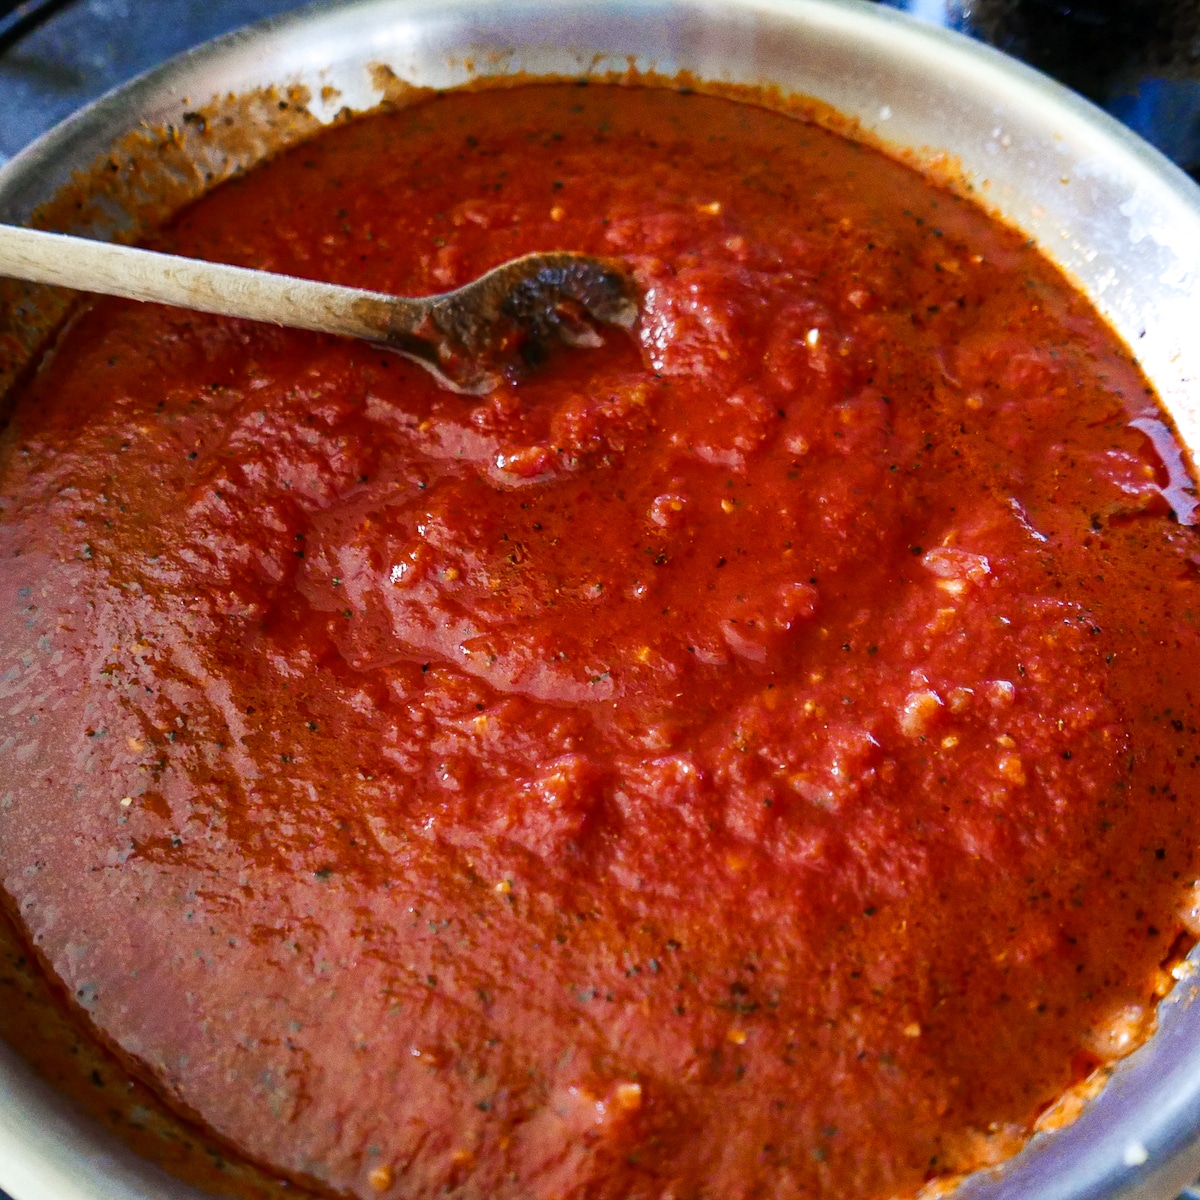 tomato paste, crushed tomatoes, and water added to garlic and herbs mixture in skillet.